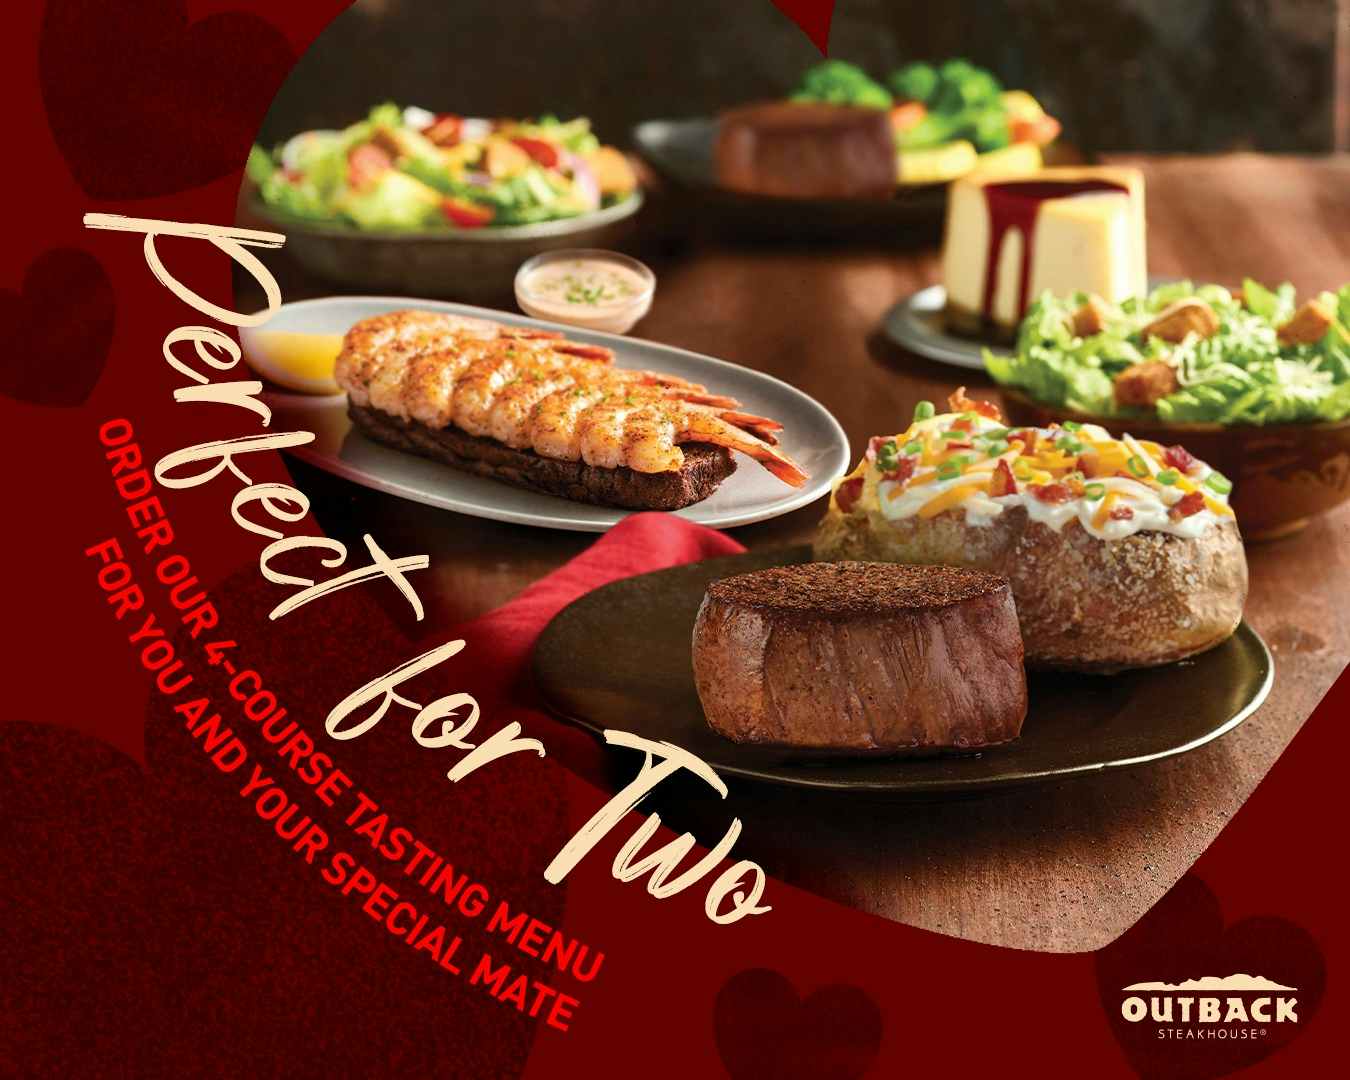 https://prod-cdn-thekrazycouponlady.imgix.net/wp-content/uploads/2019/02/valentines-day-food-deals-freebies-outback-steakhouse-meal-for-two-1675617785-1675617785.jpg?auto=format&fit=fill&q=25